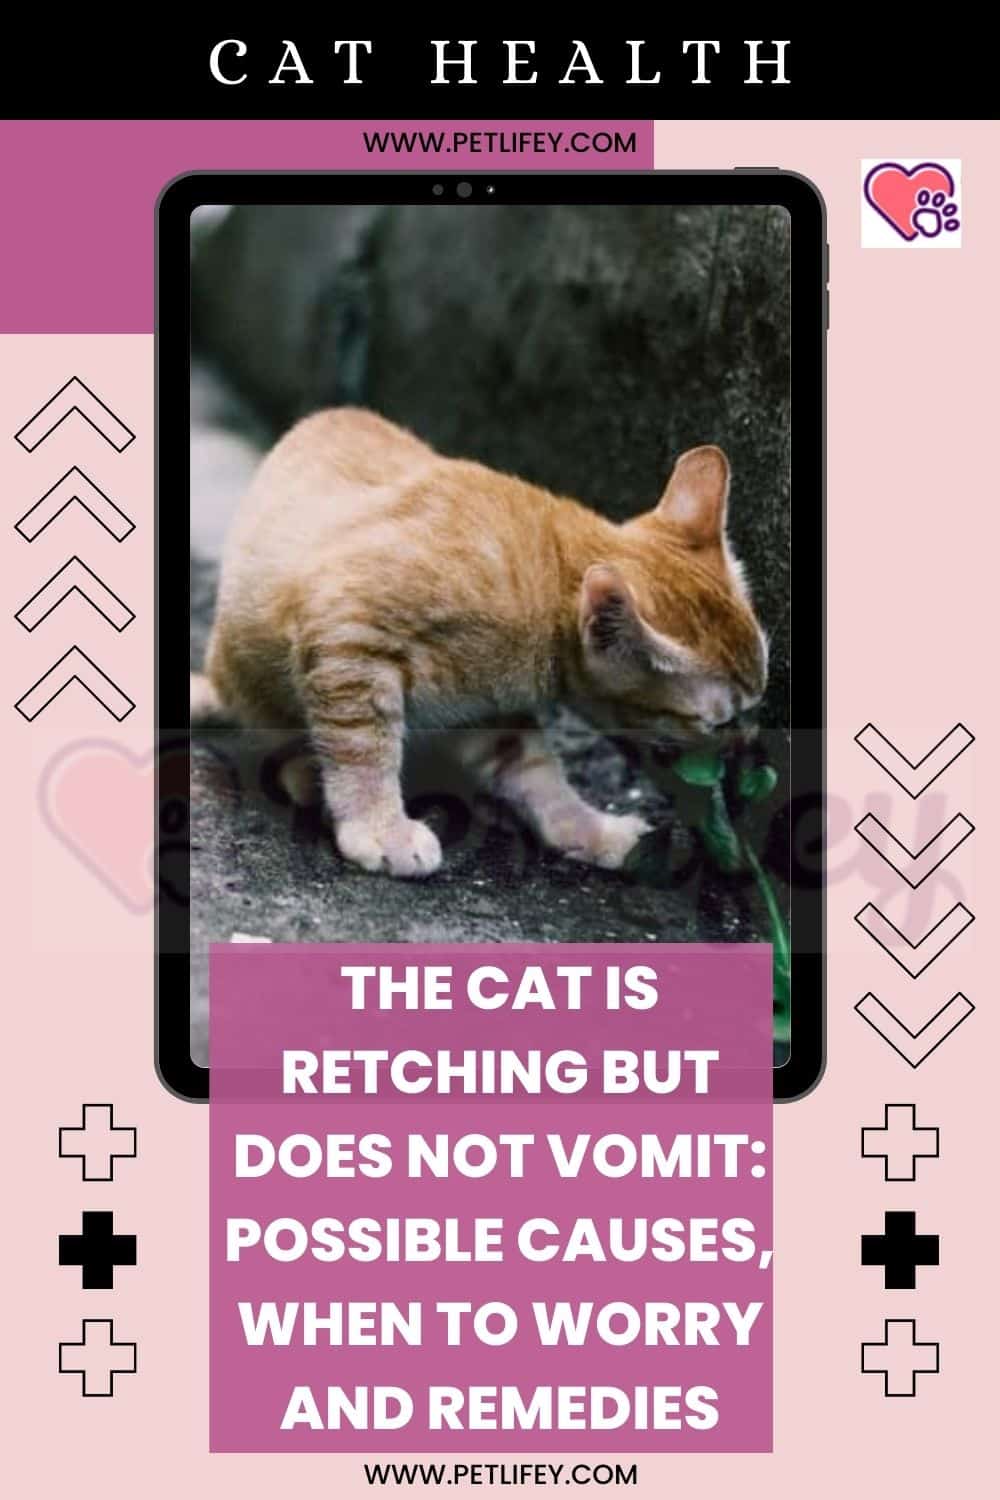 The cat is retching but does not vomit